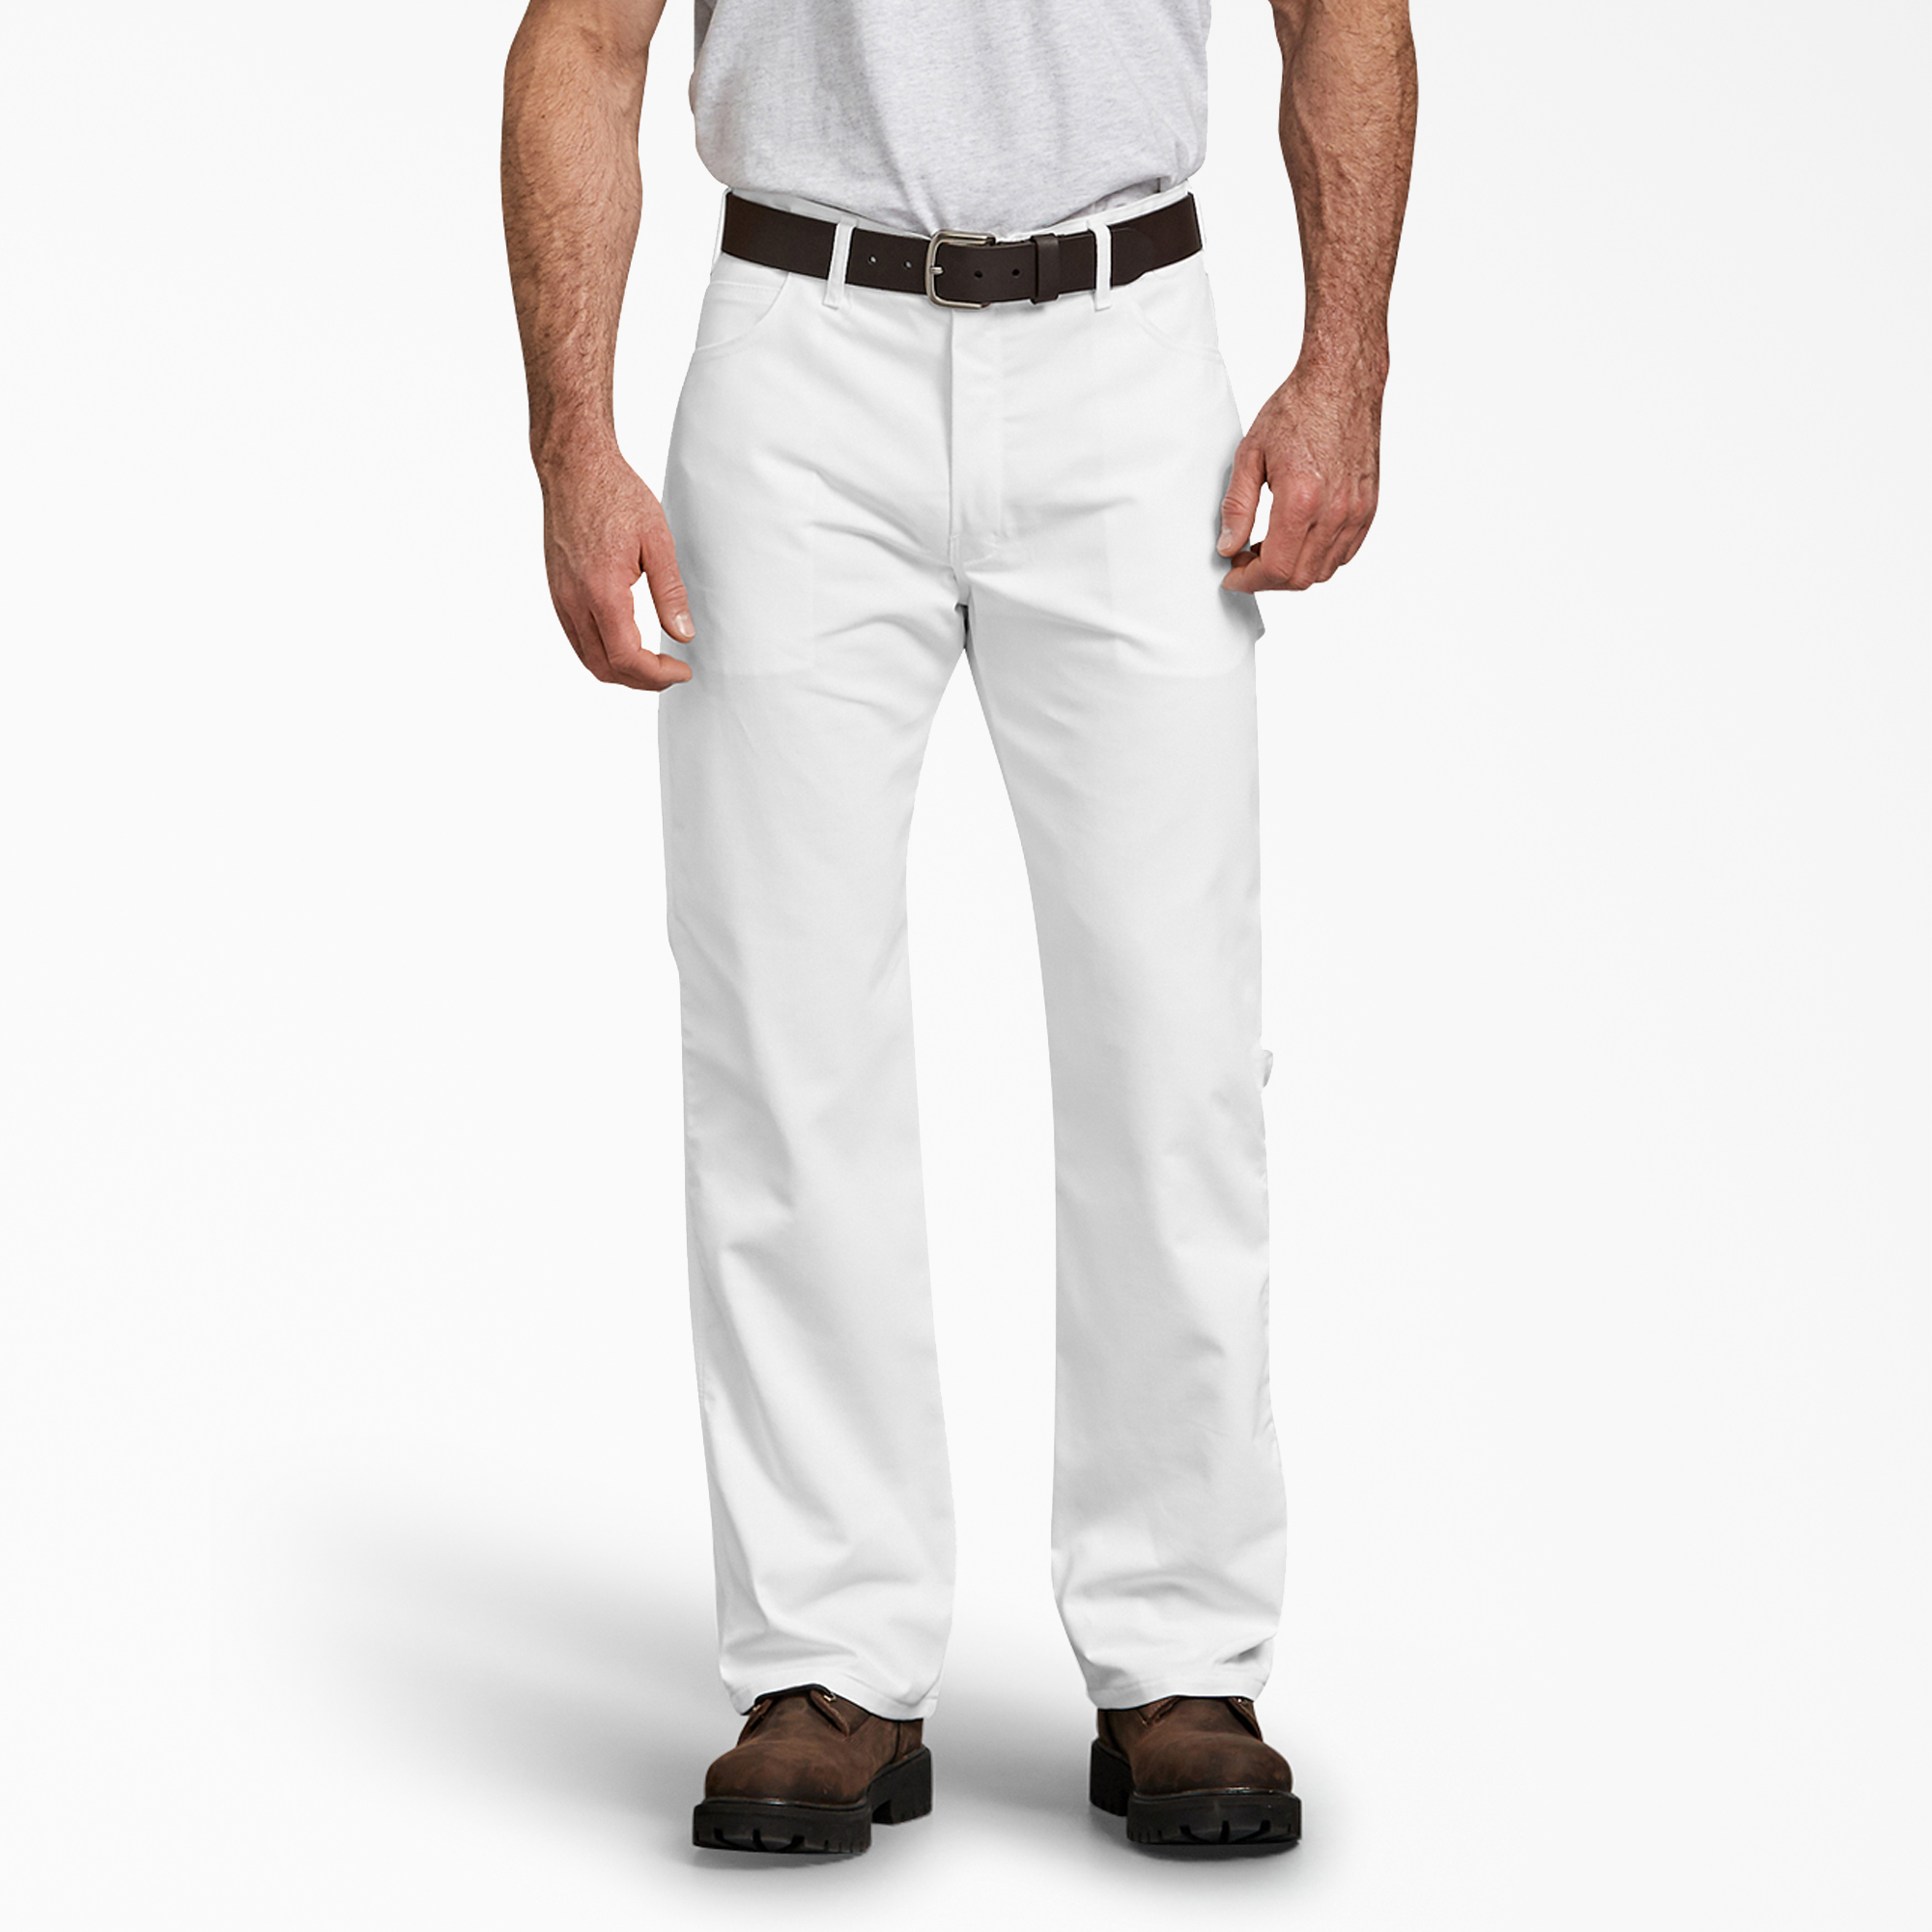 FLEX Relaxed Fit Straight Leg Painter's Pants - White (WH)